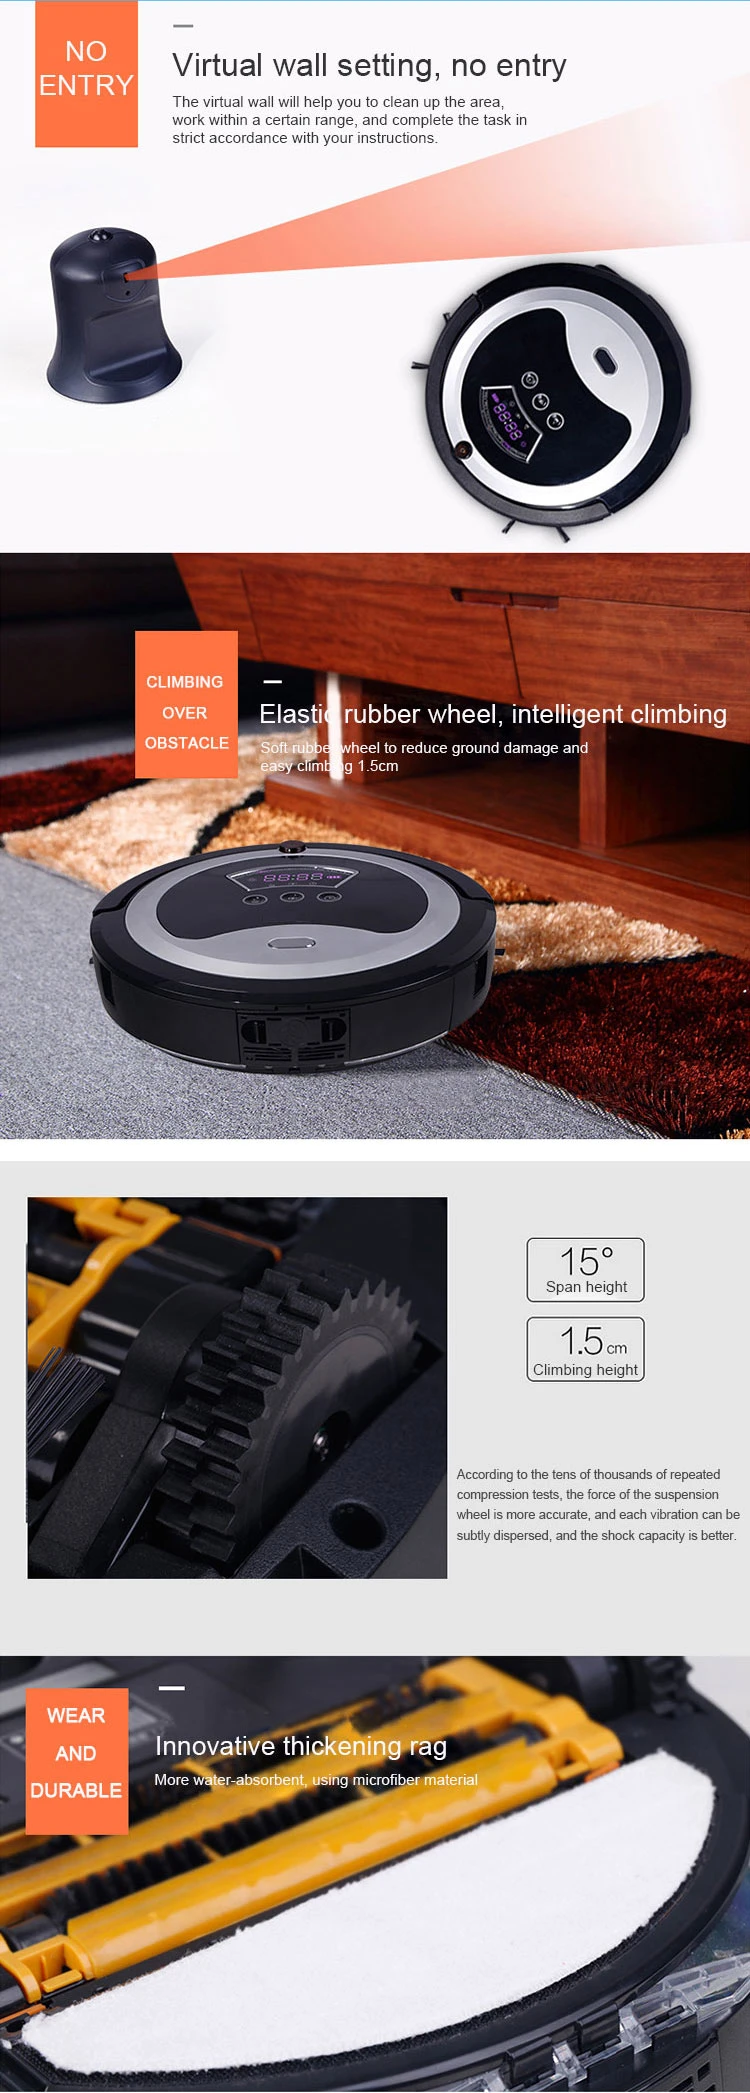 Wet and Dry Sweeping and Mopping Machine Robotic Vacuum Cleaner